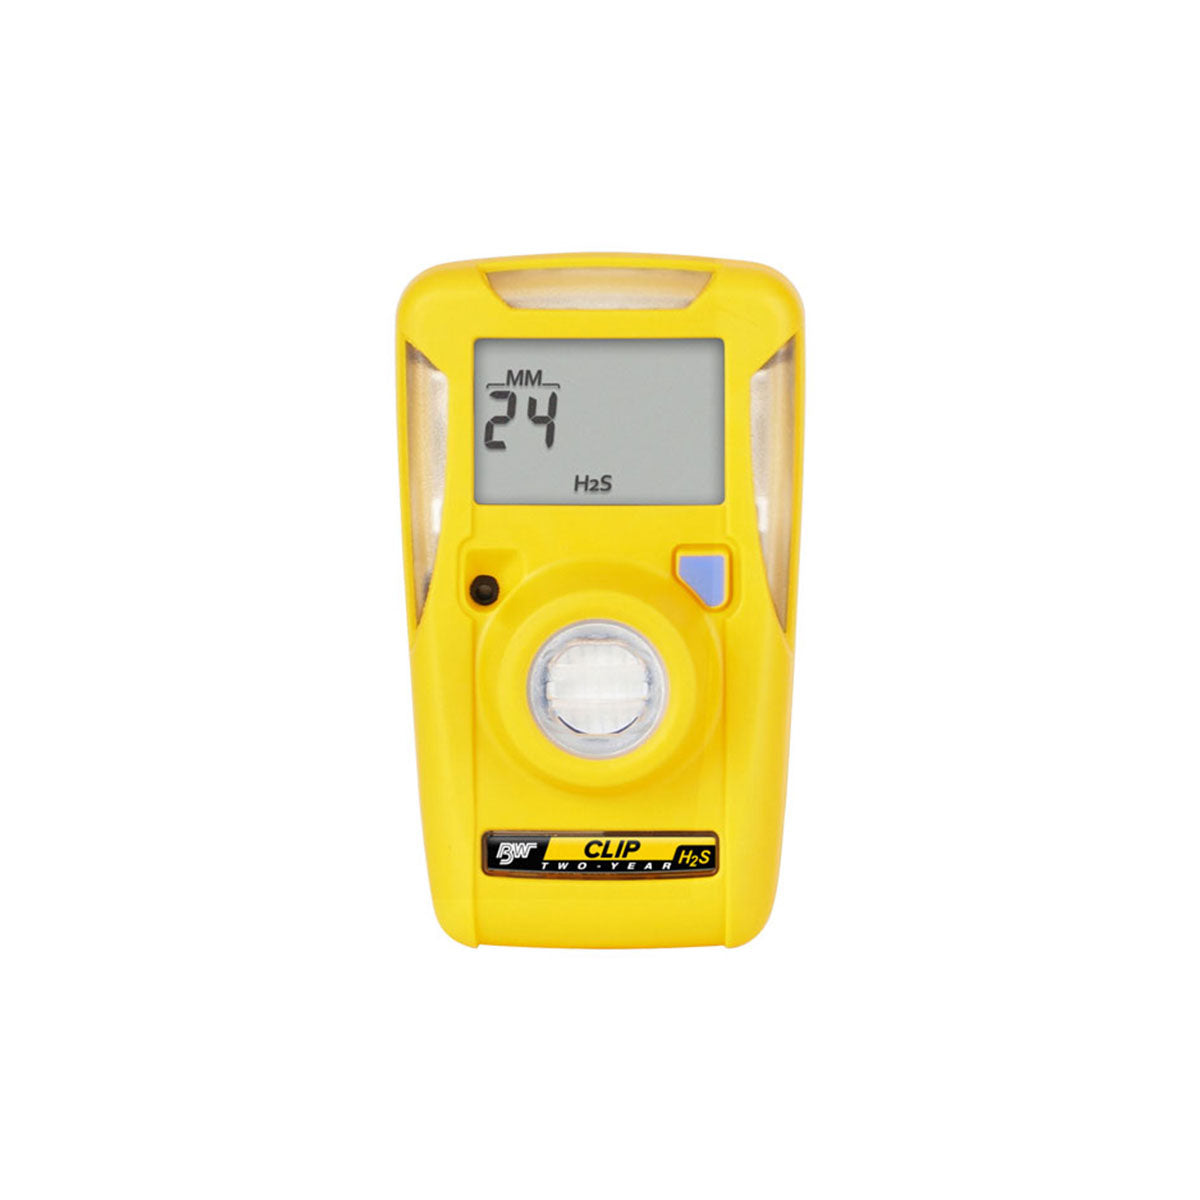 Detector 2 Year Disposable H2S BW Clip Extreme Measuring Range 0-100 PPM Factory Alarm Setpoint 10-15 PPM Alarm Setpoints are User Adjustable Before and After Activation